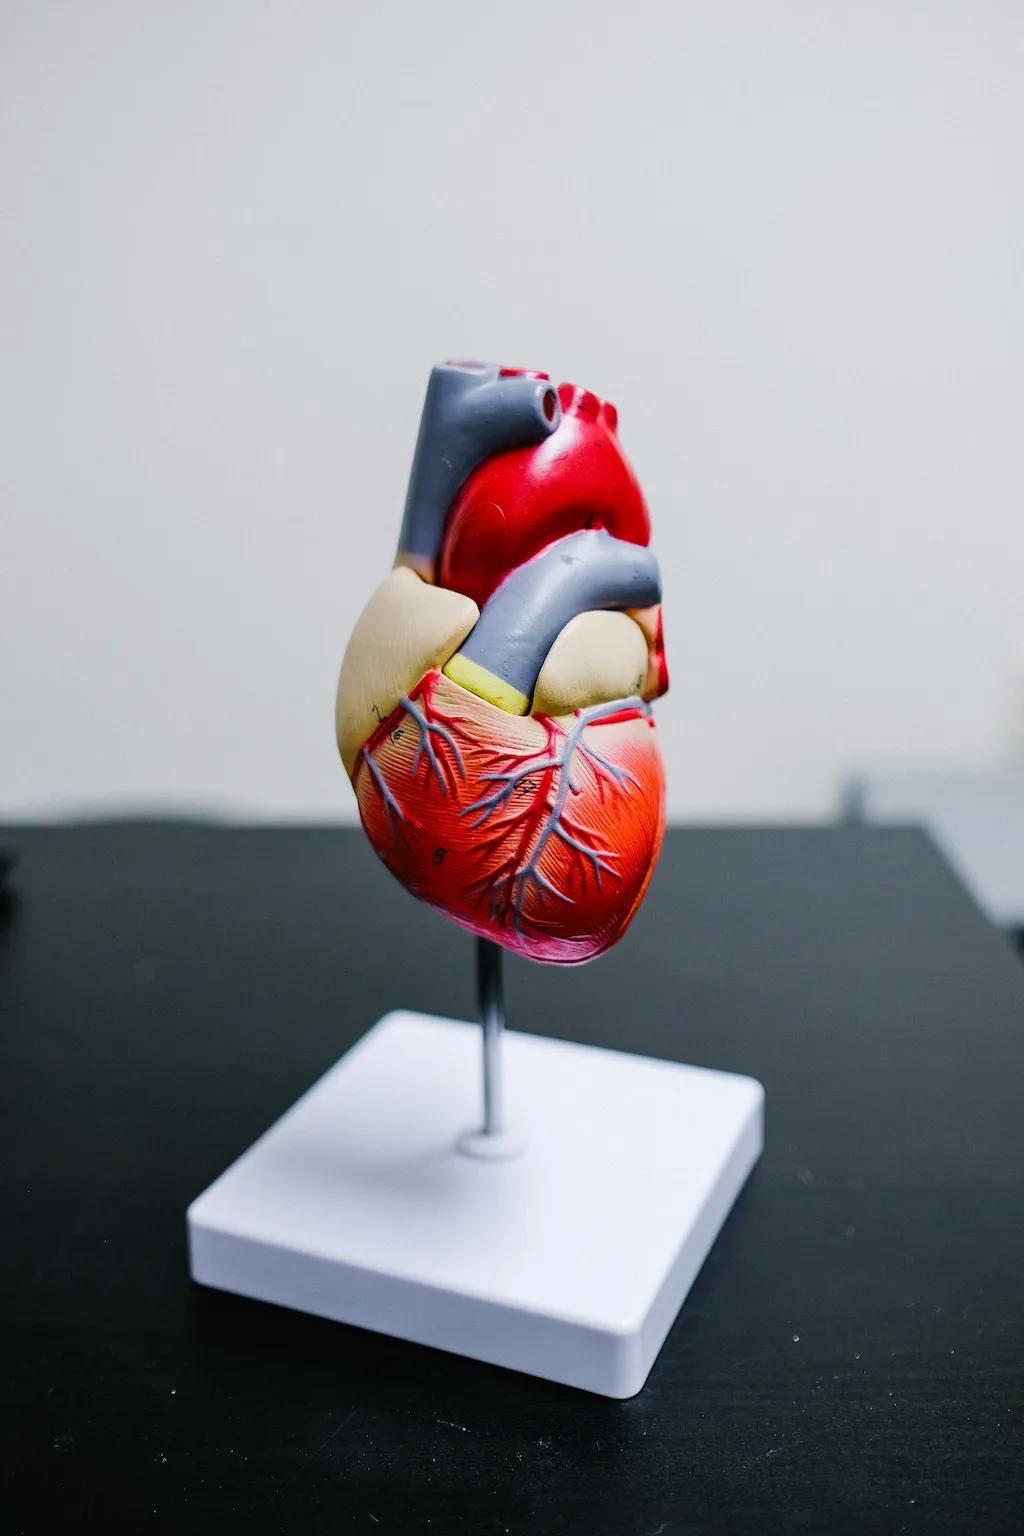 anatomical model of heart